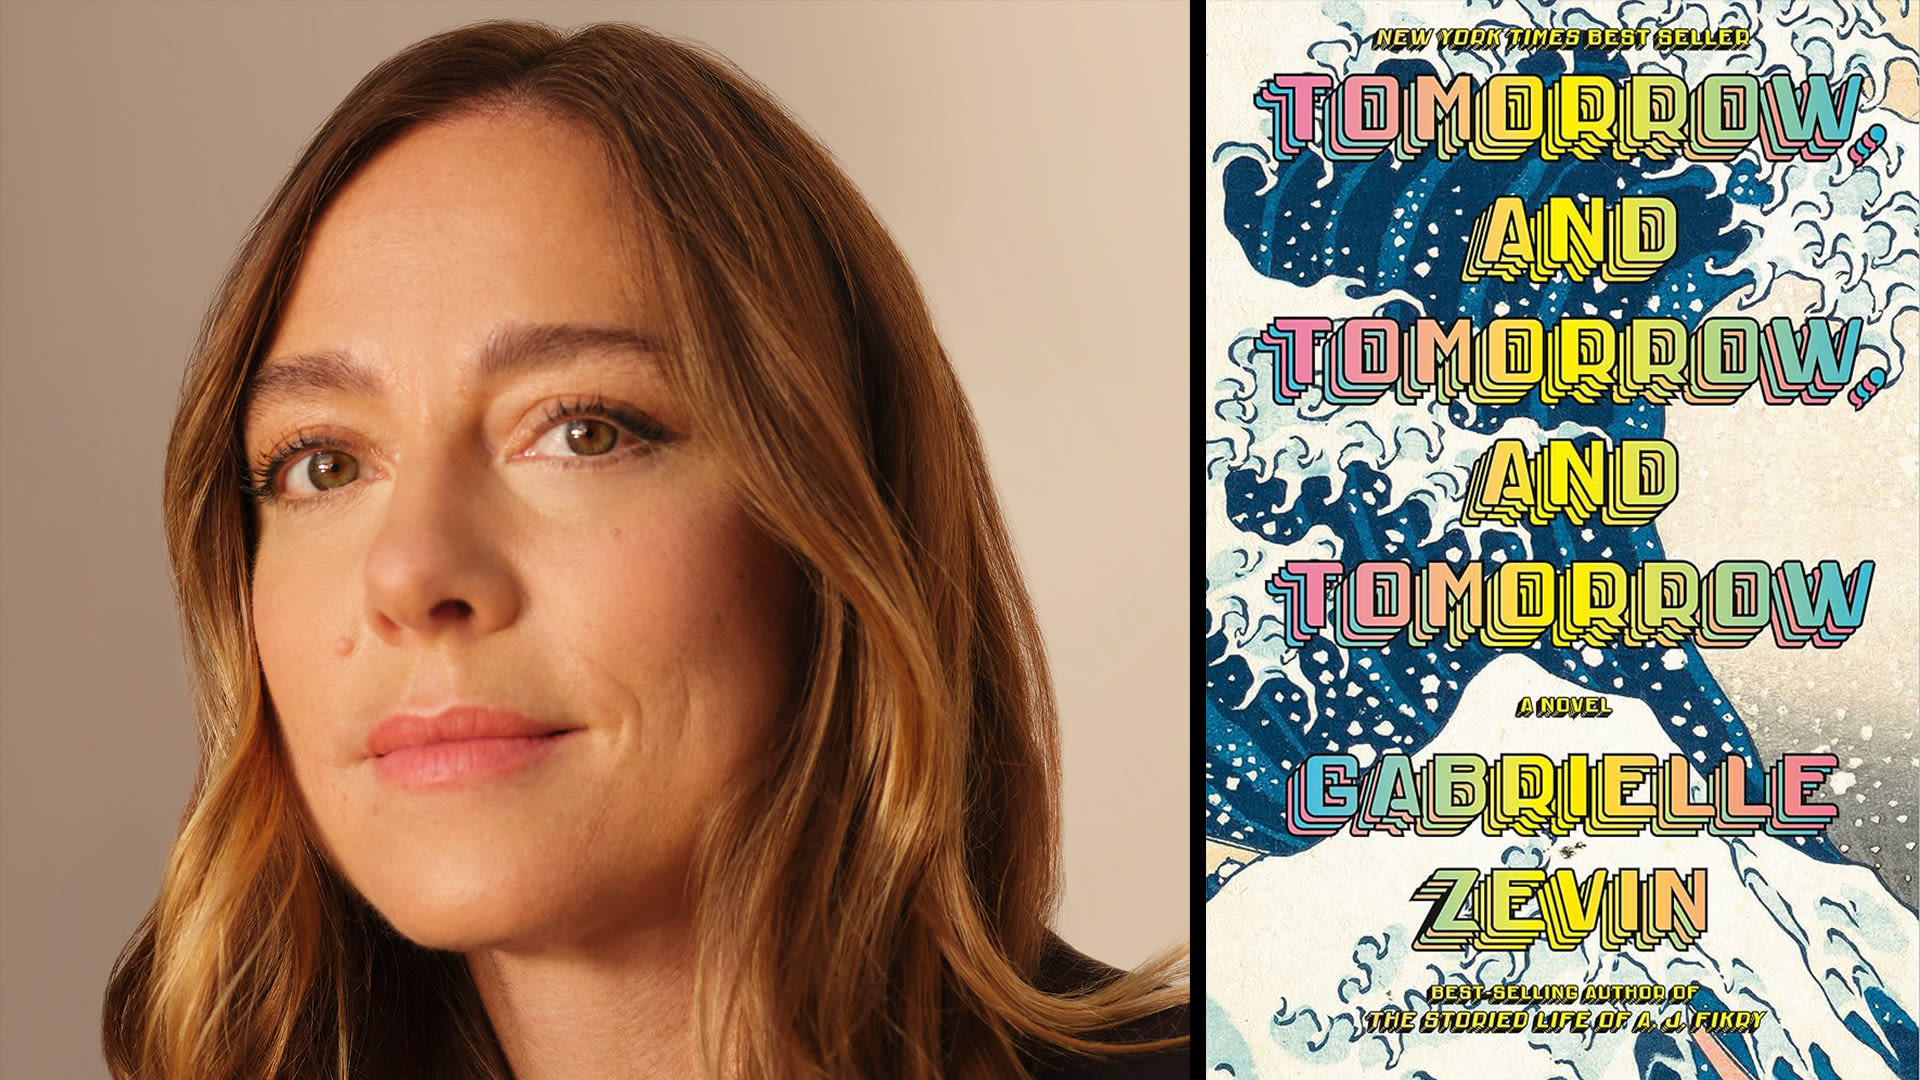 ‘CODA’ Director Siân Heder Boards Paramount’s Adaptation Of New York Times Best-Seller ‘Tomorrow, And Tomorrow, And Tomorrow’